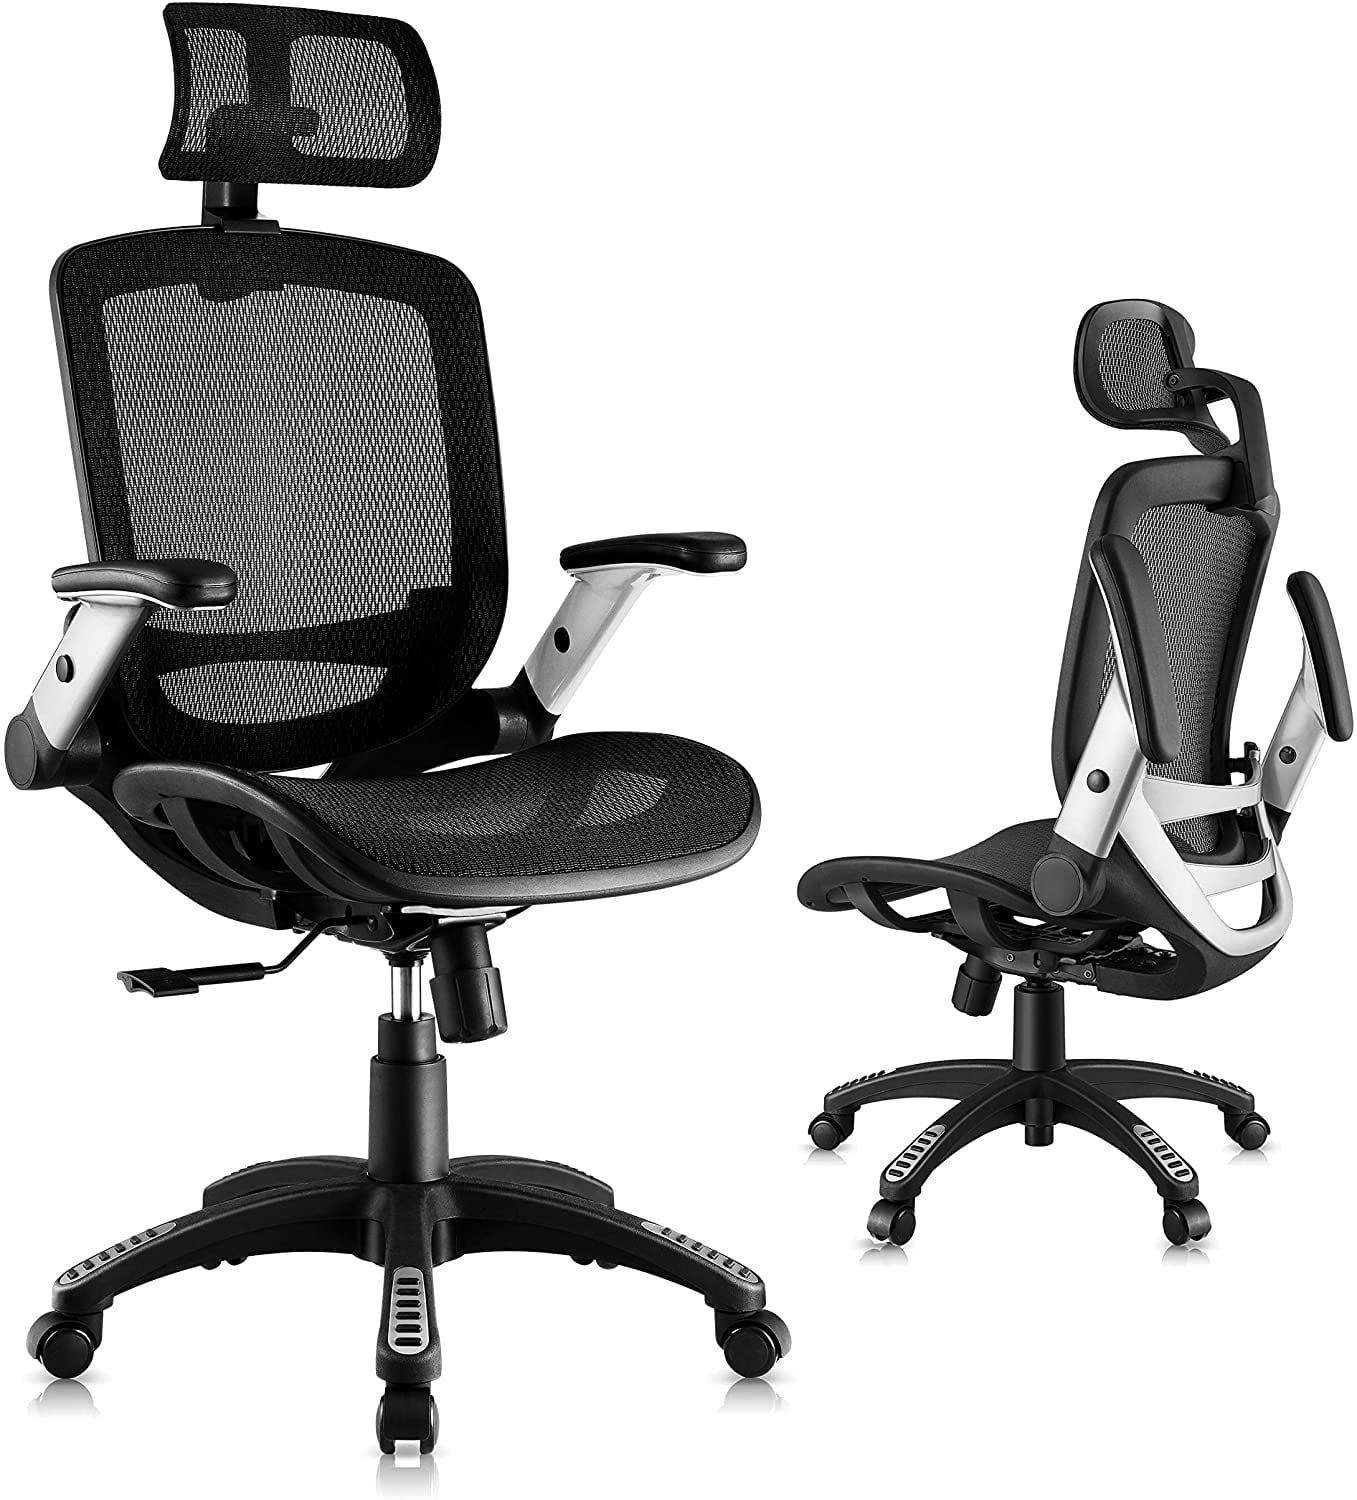 Wheels and Arms Details about   Ergonomic  Mesh Office Chair Computer Swivel Desk Task Chair w 